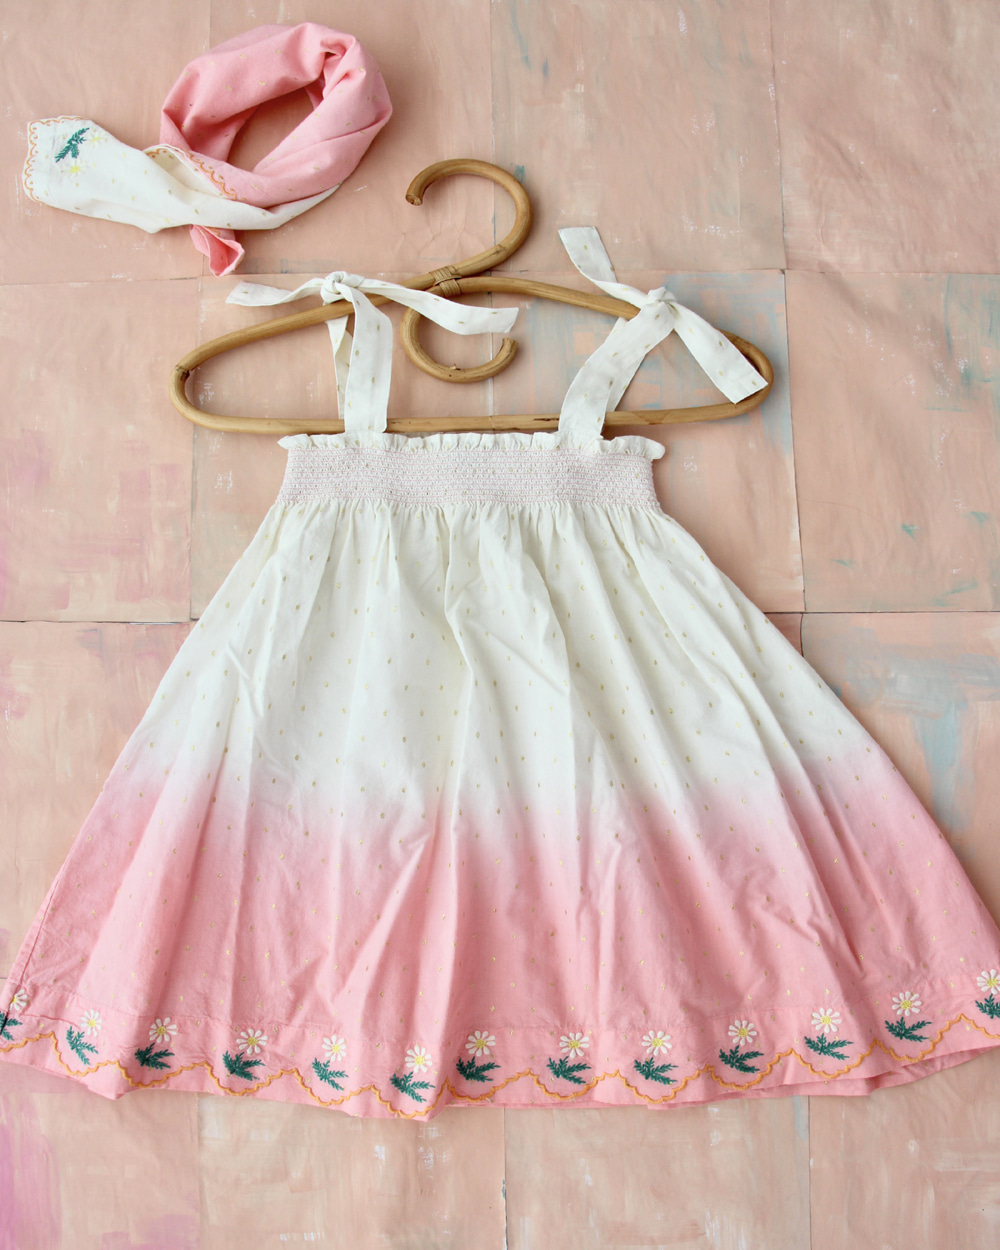 [ BONJOUR] Dip dye skirt dress with embroidery /Cotton voile full lining